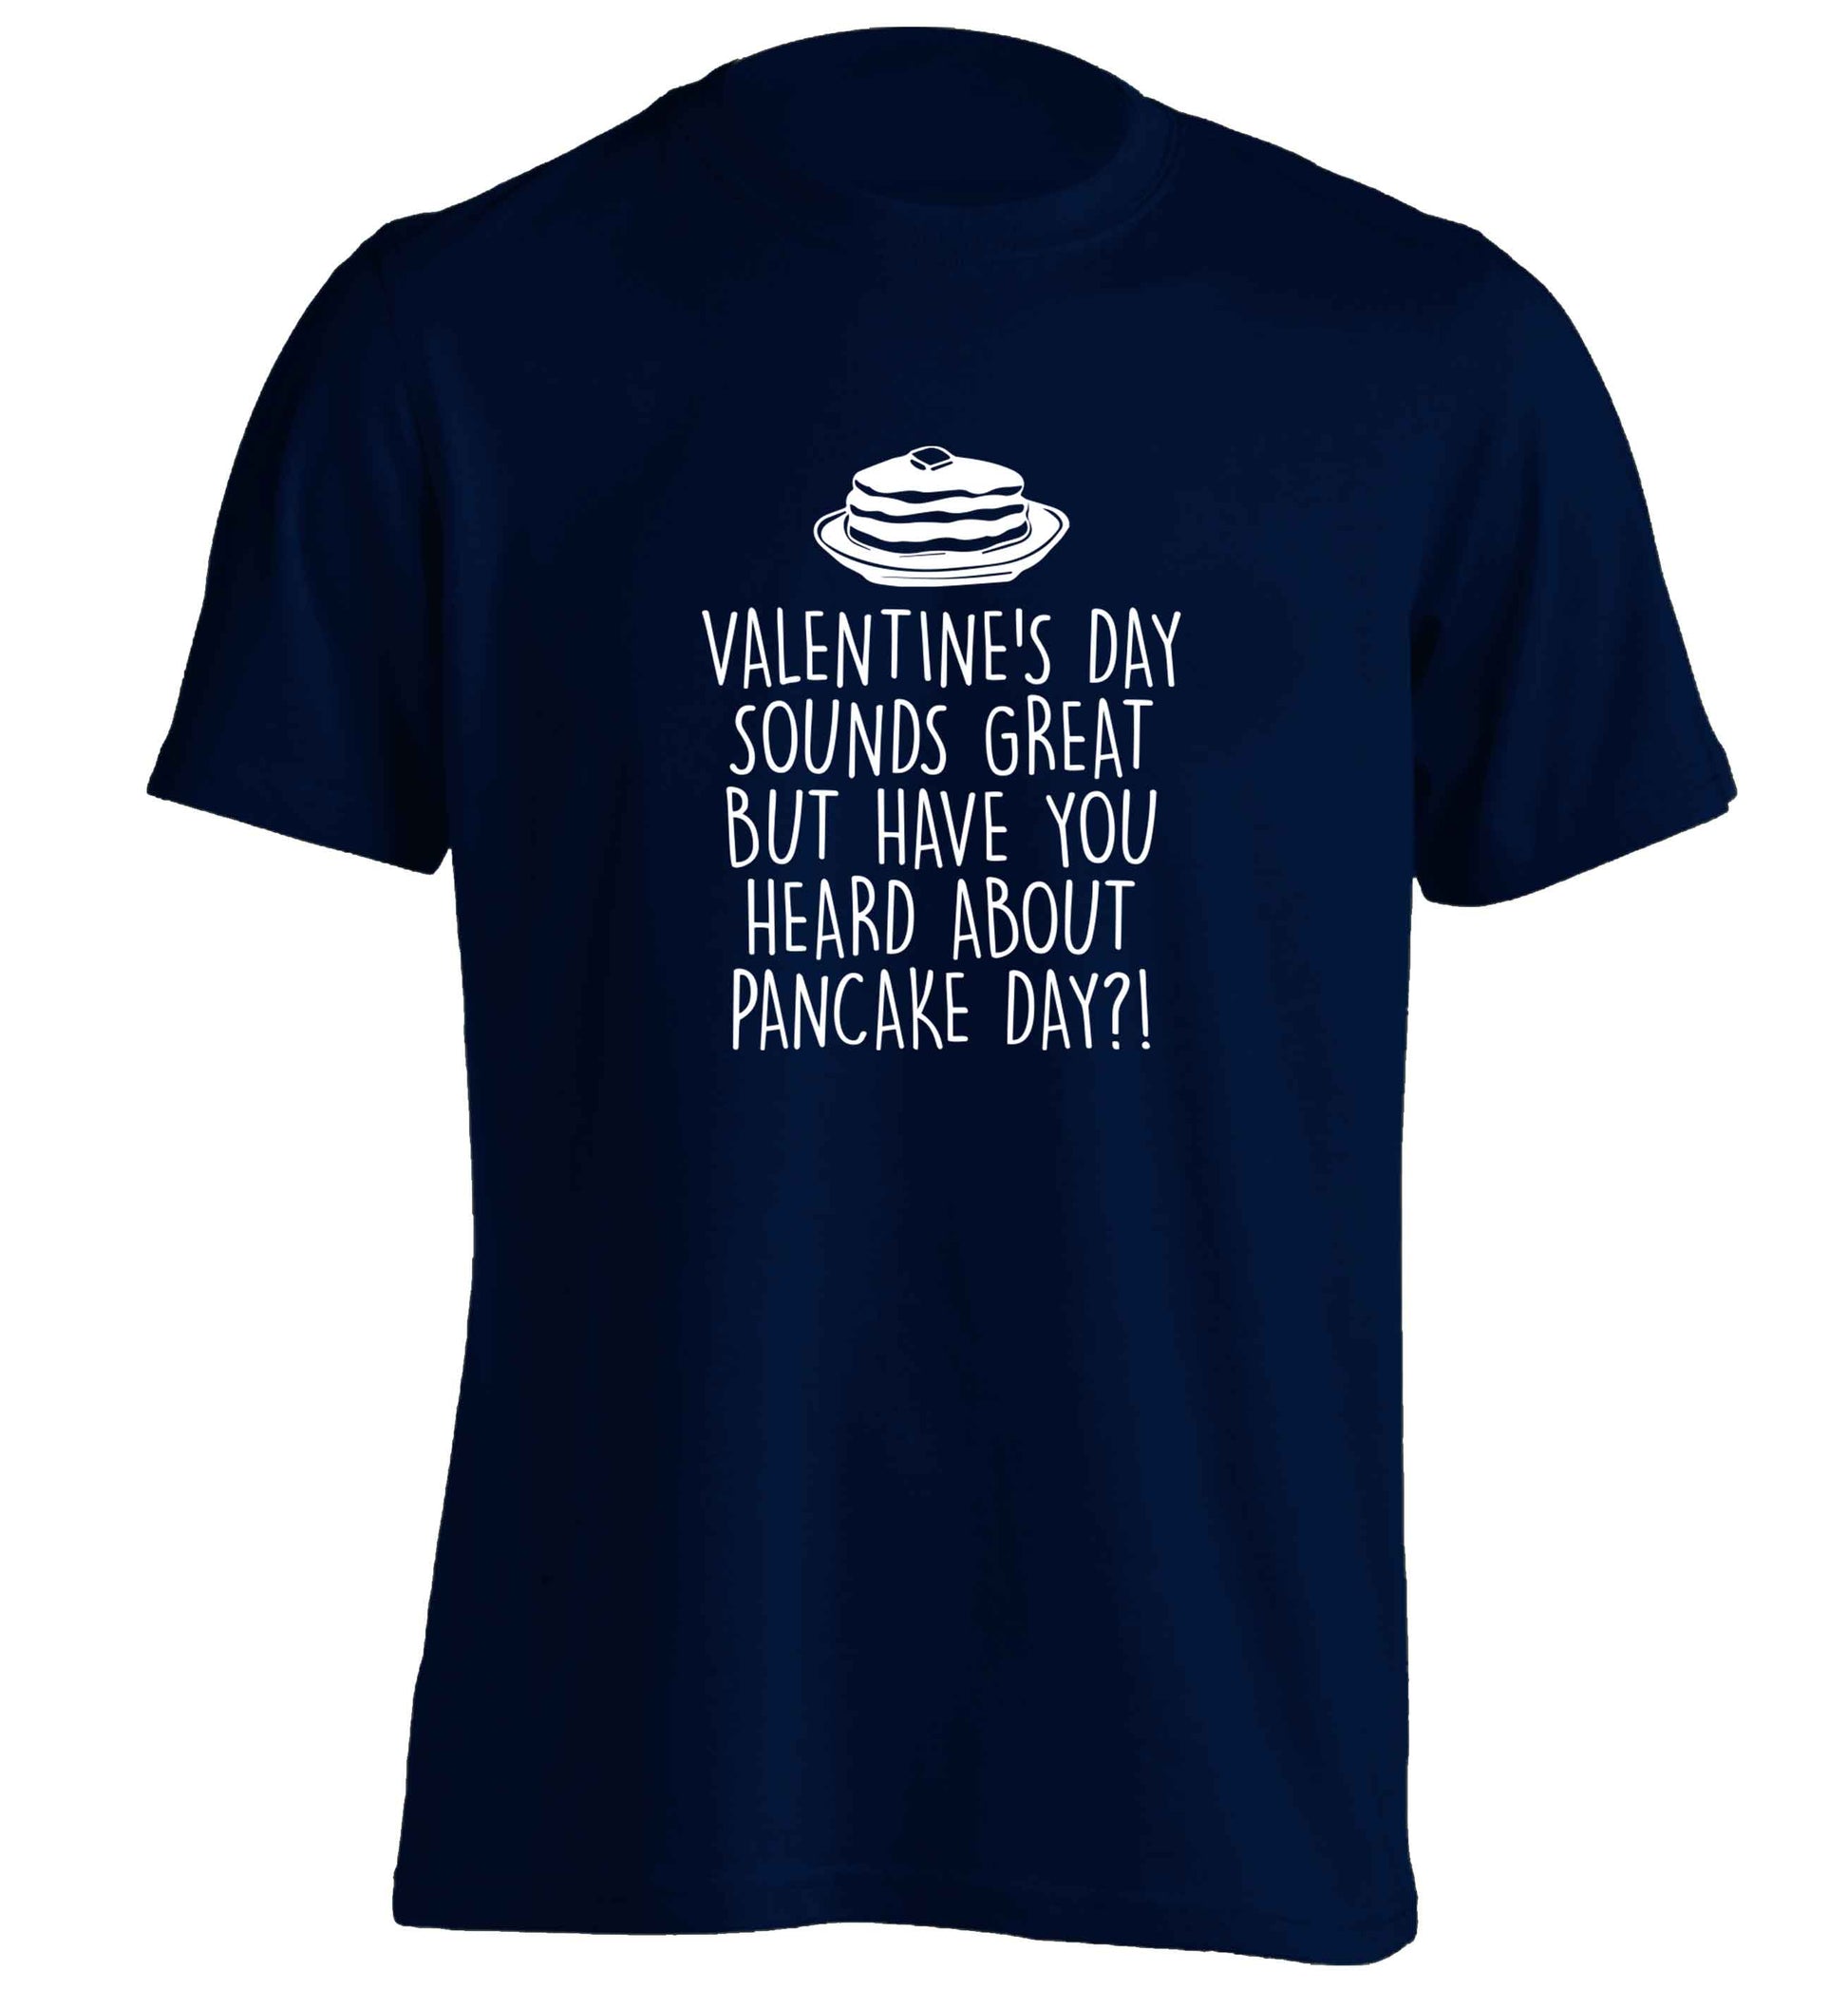 Valentine's day sounds great but have you heard about pancake day?! adults unisex navy Tshirt 2XL